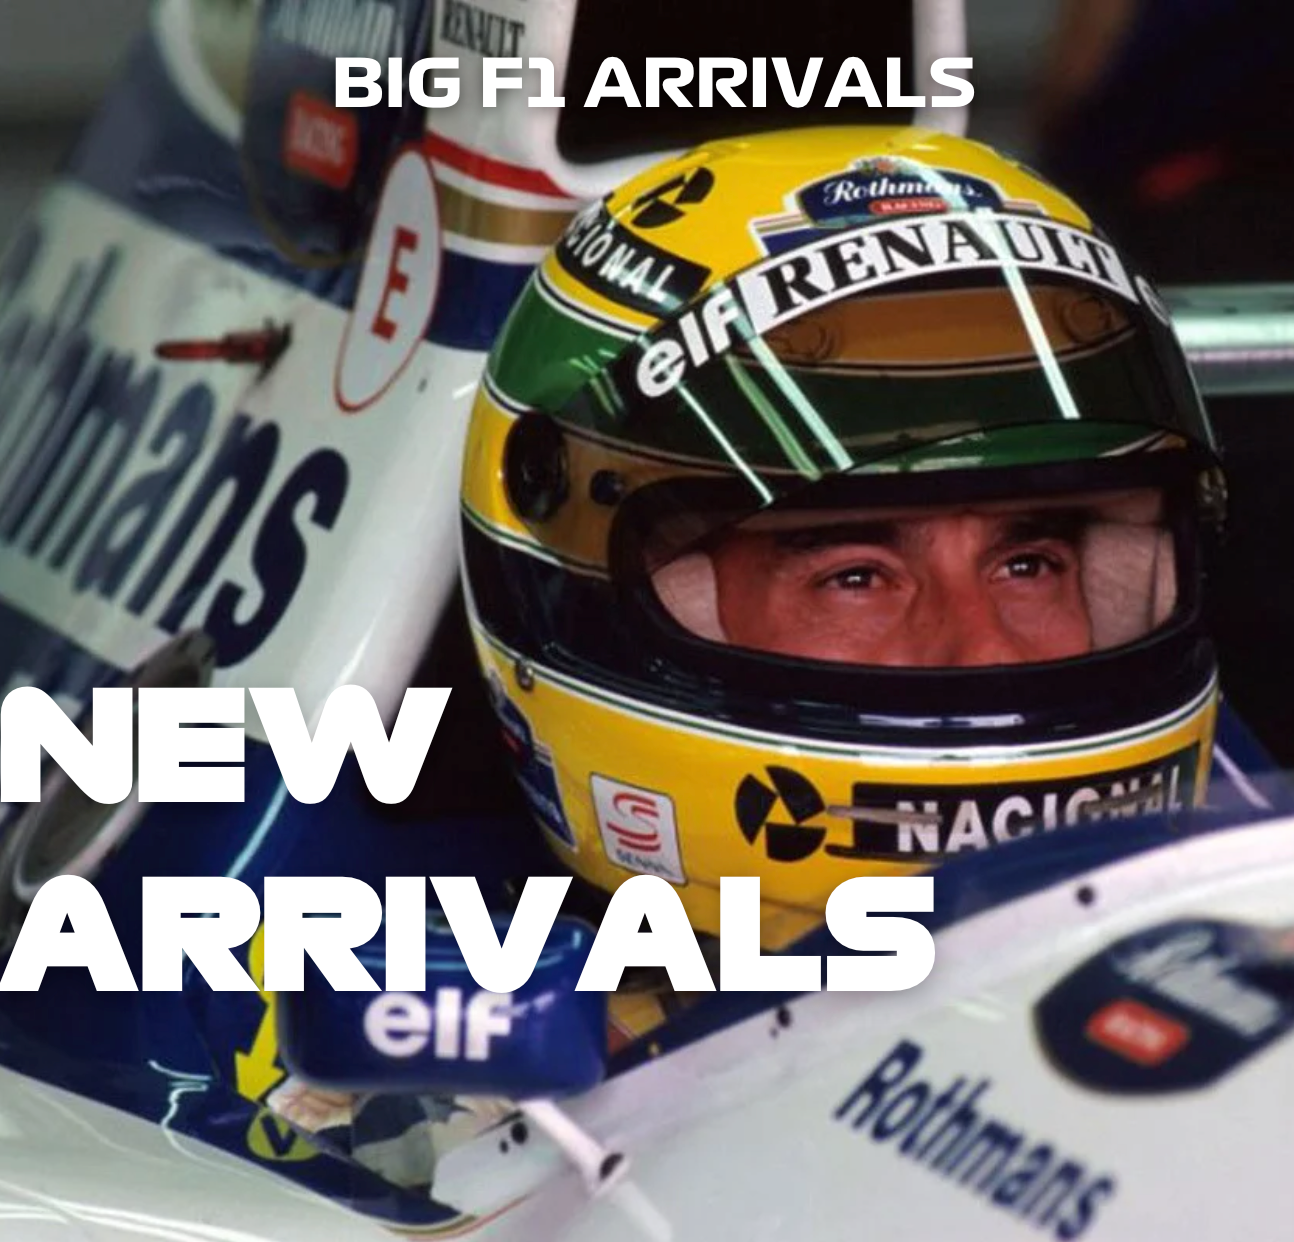 Big F1 Arrivals from legends new and old!